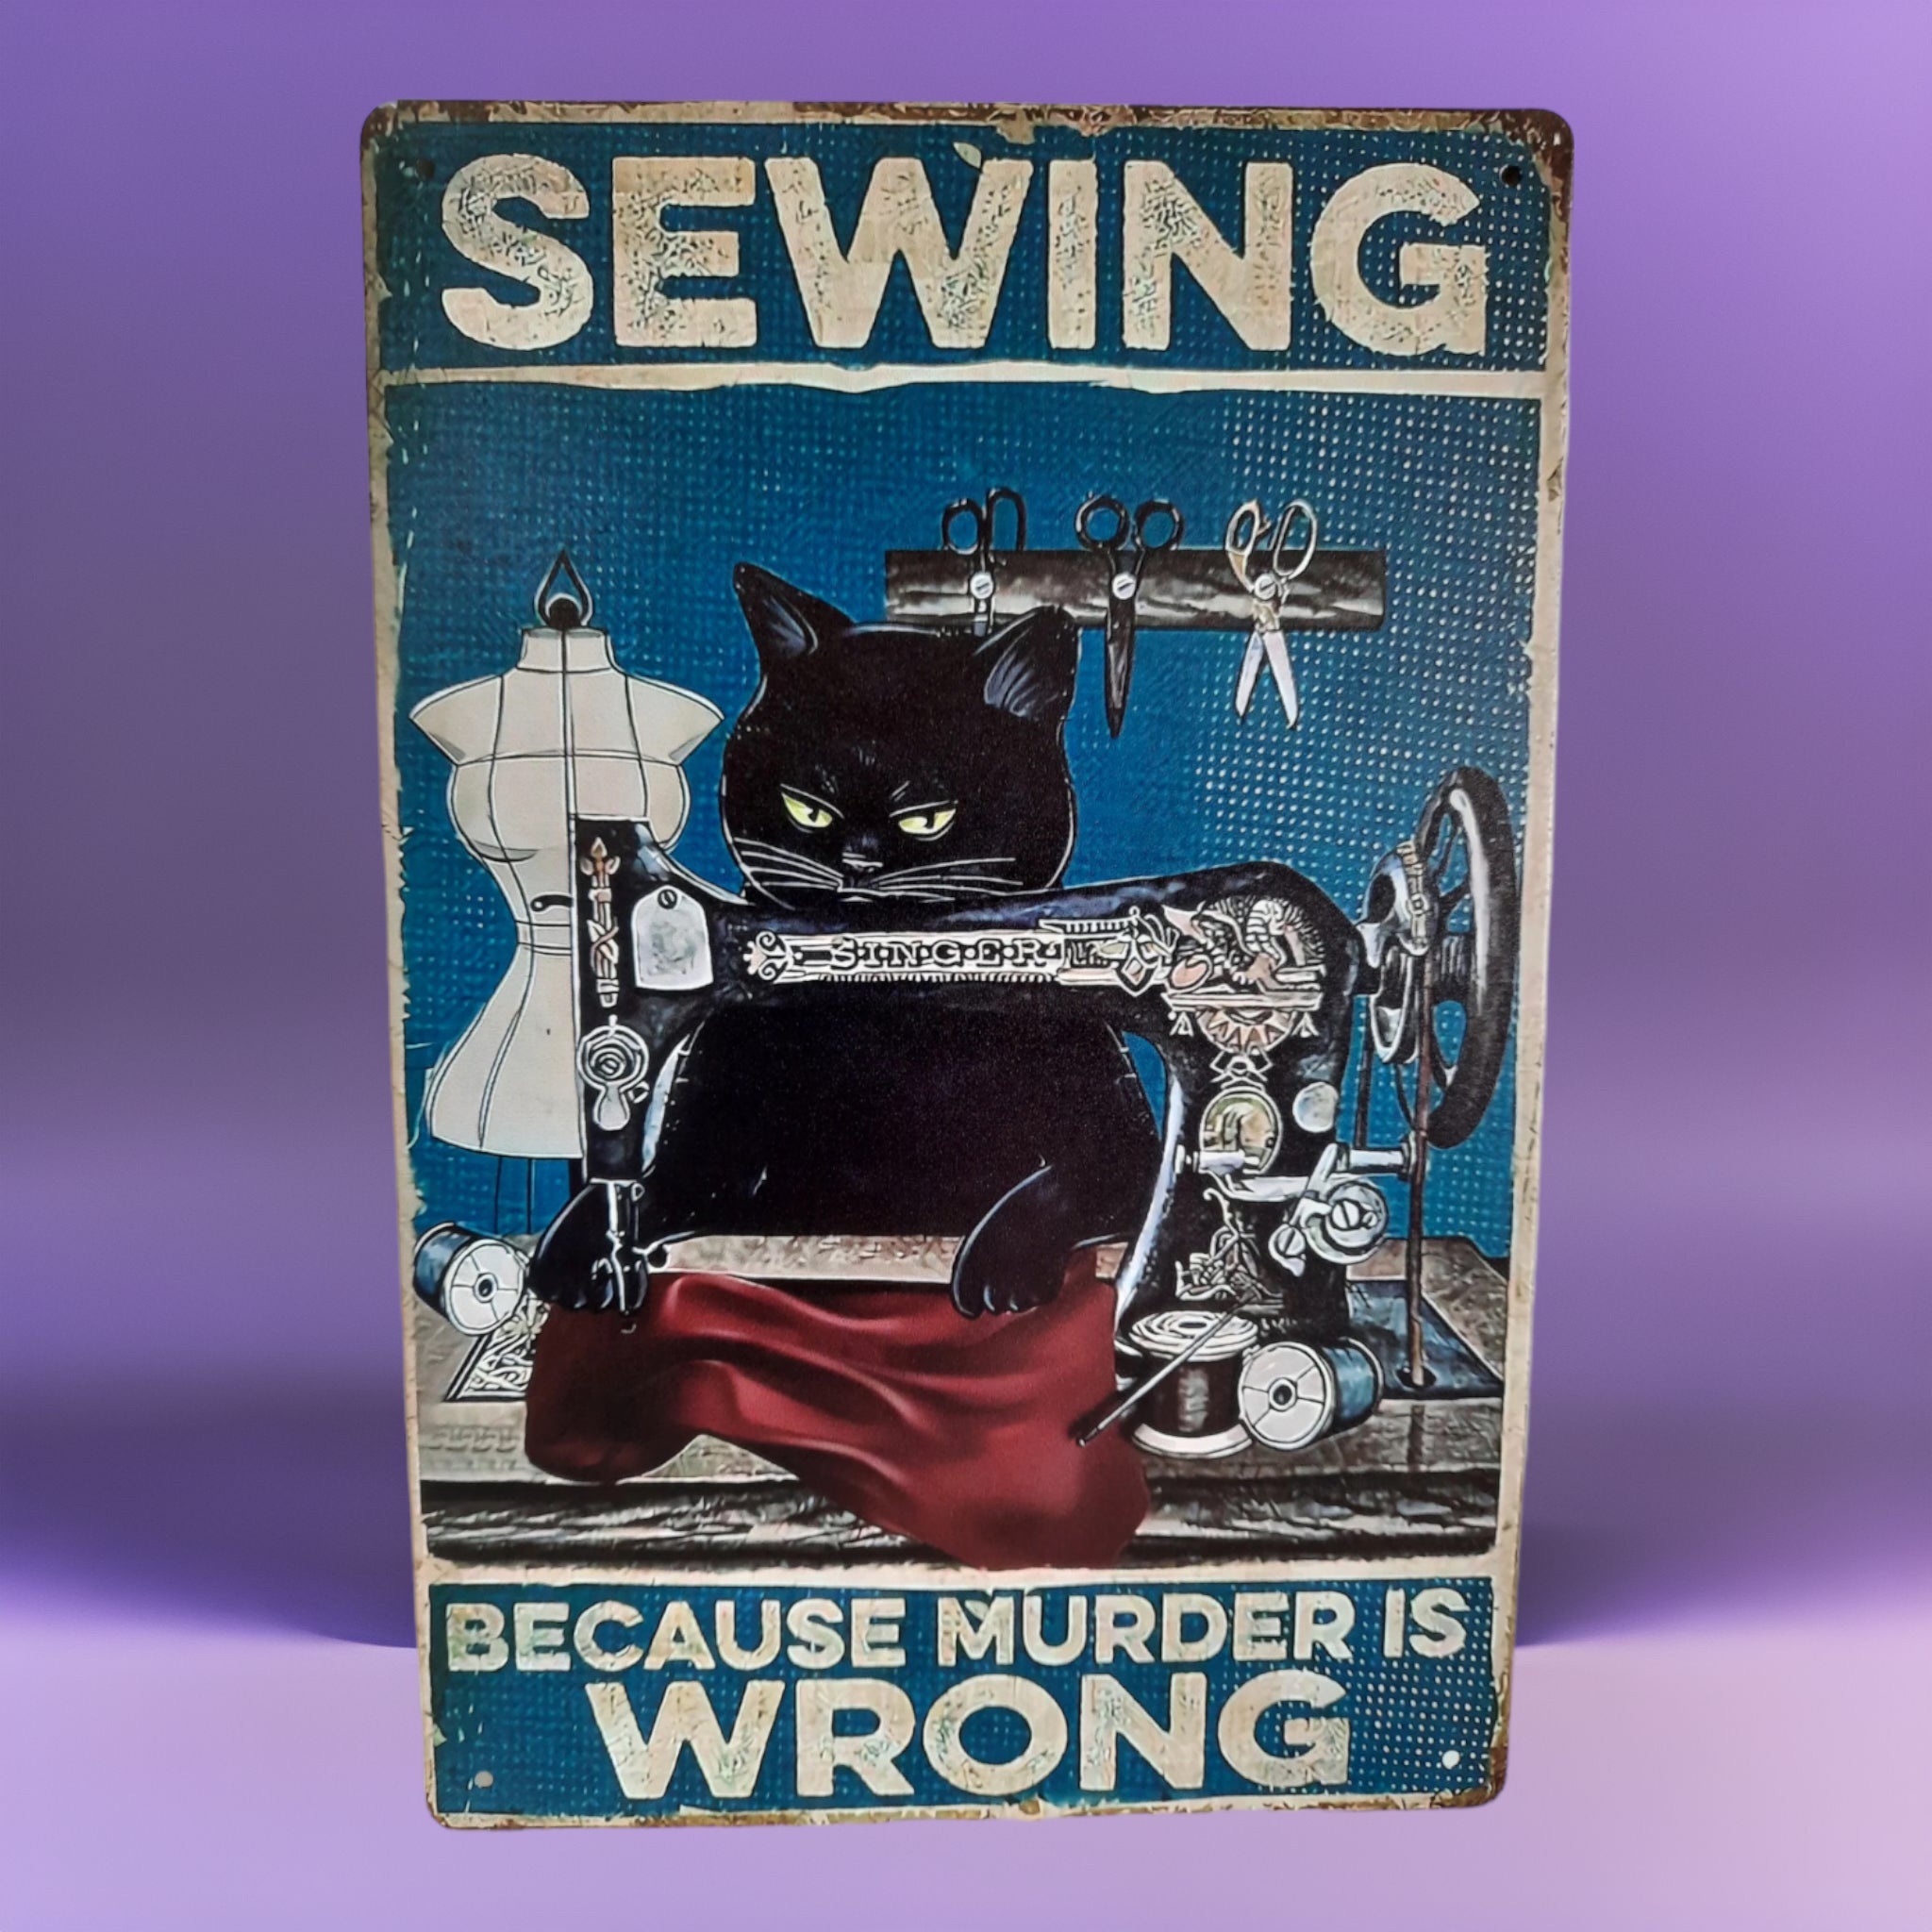 Vintage look Cat Themed Tin Wall Art - Knitting - Because Murder is Wrong